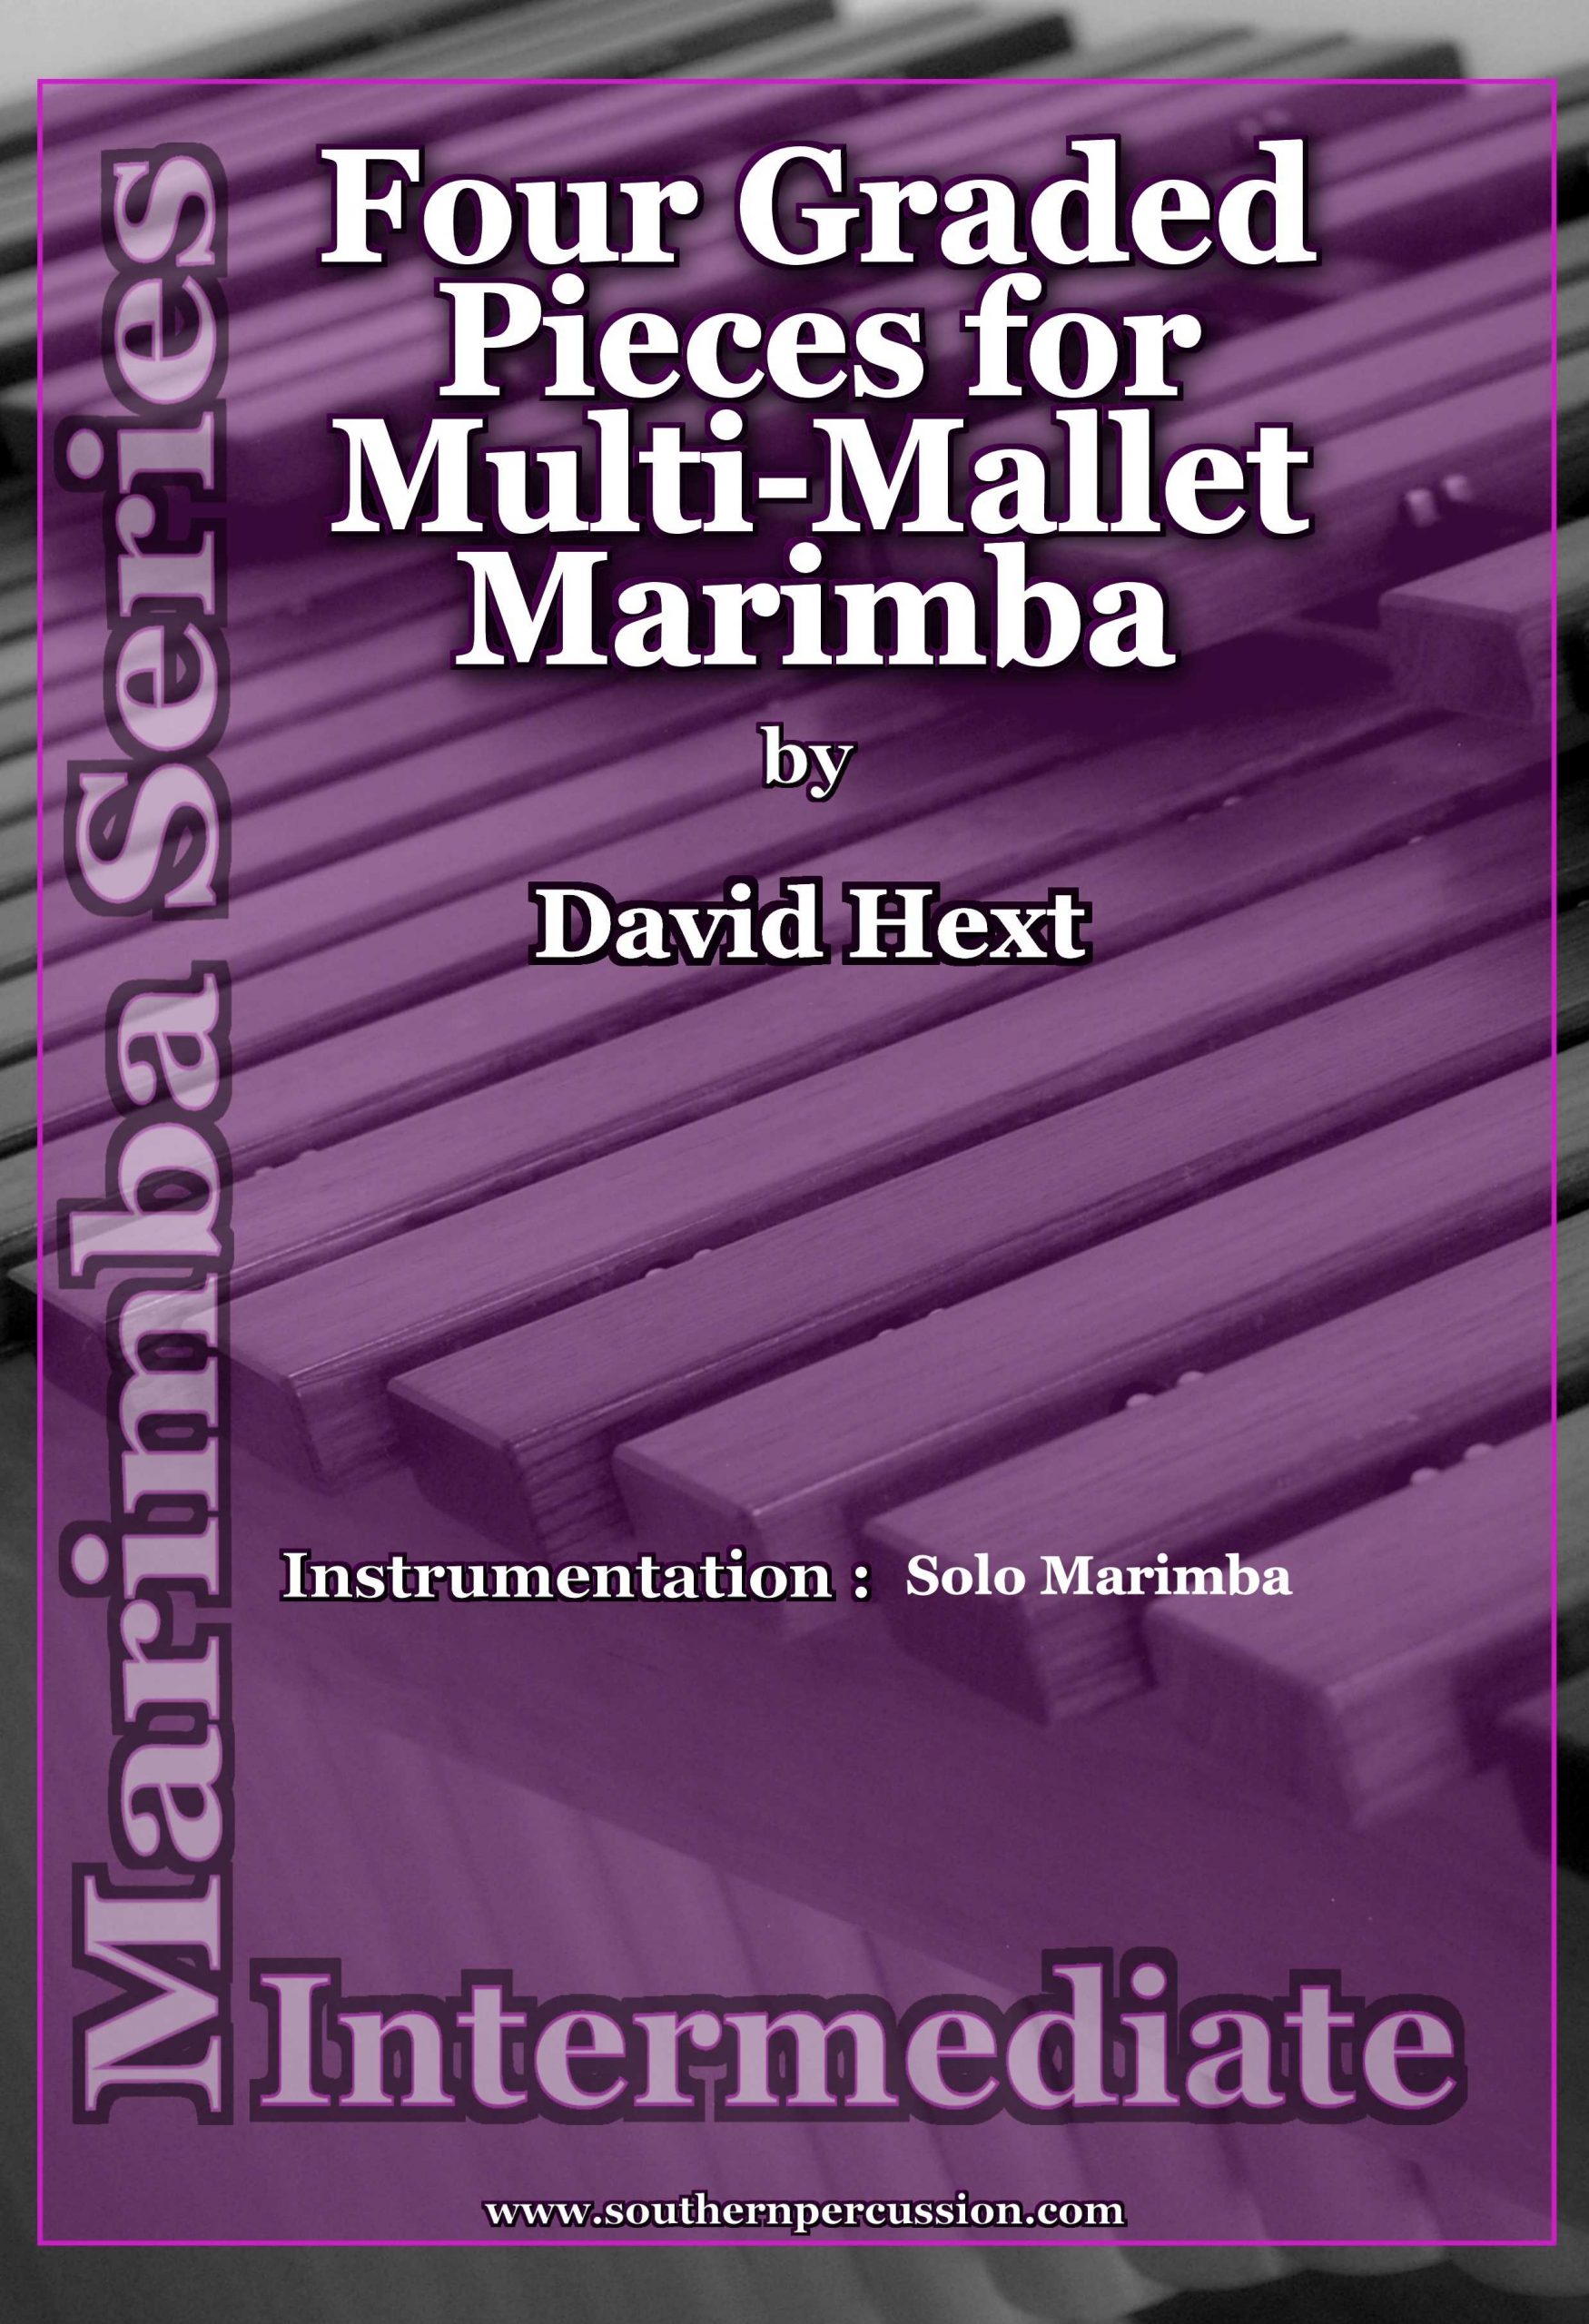 Four Graded Pieces for Multi-Mallet Marimba by David Hext